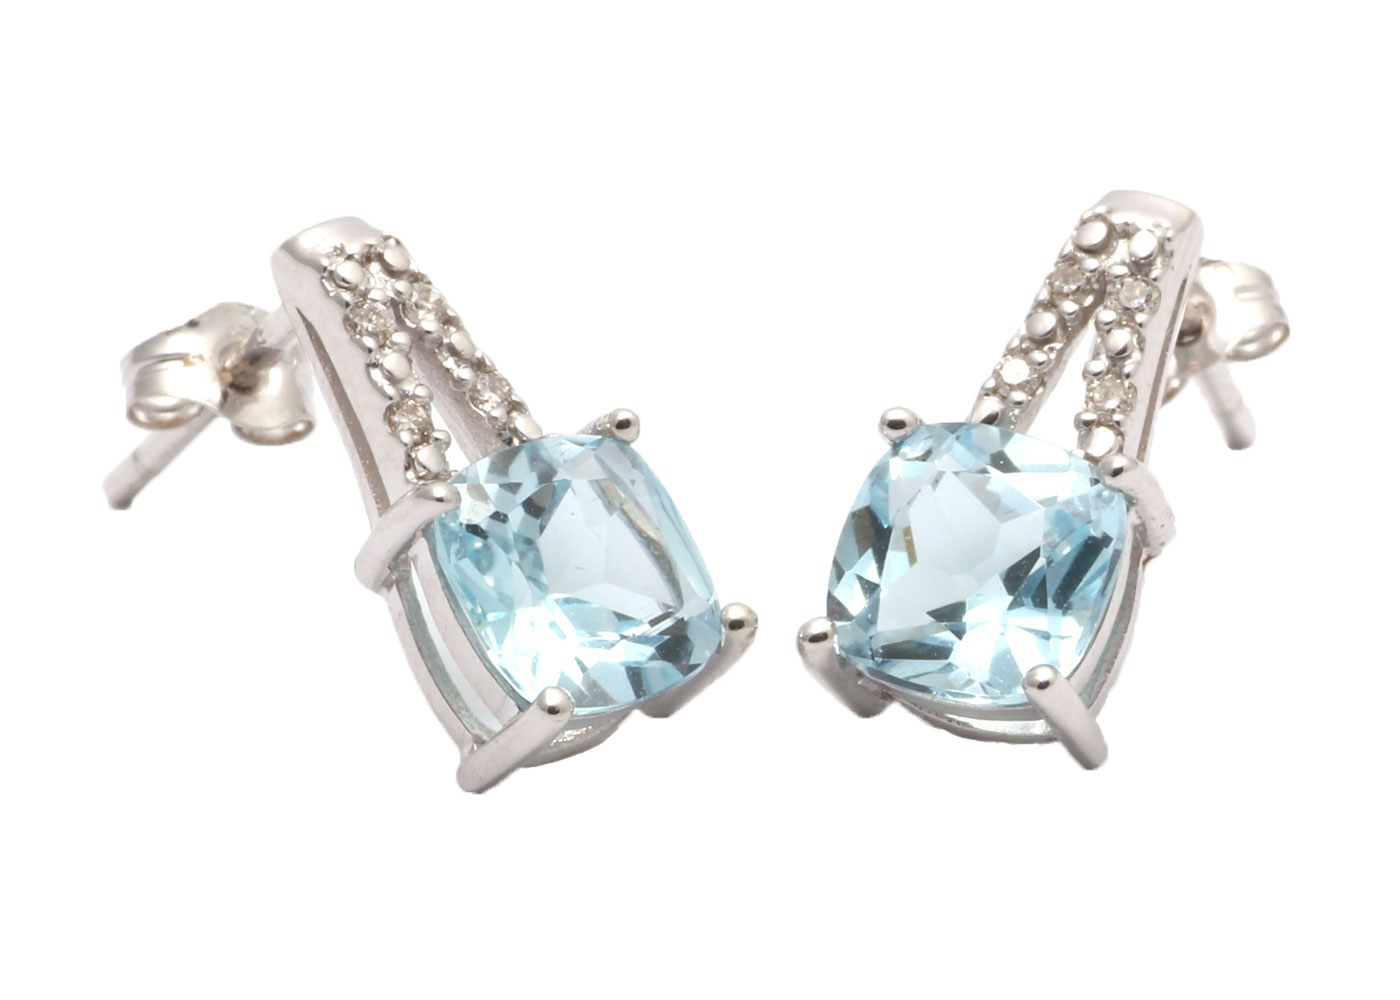 9ct White Gold Diamond And Blue Topaz Earring 0.05 Carats - Image 2 of 8